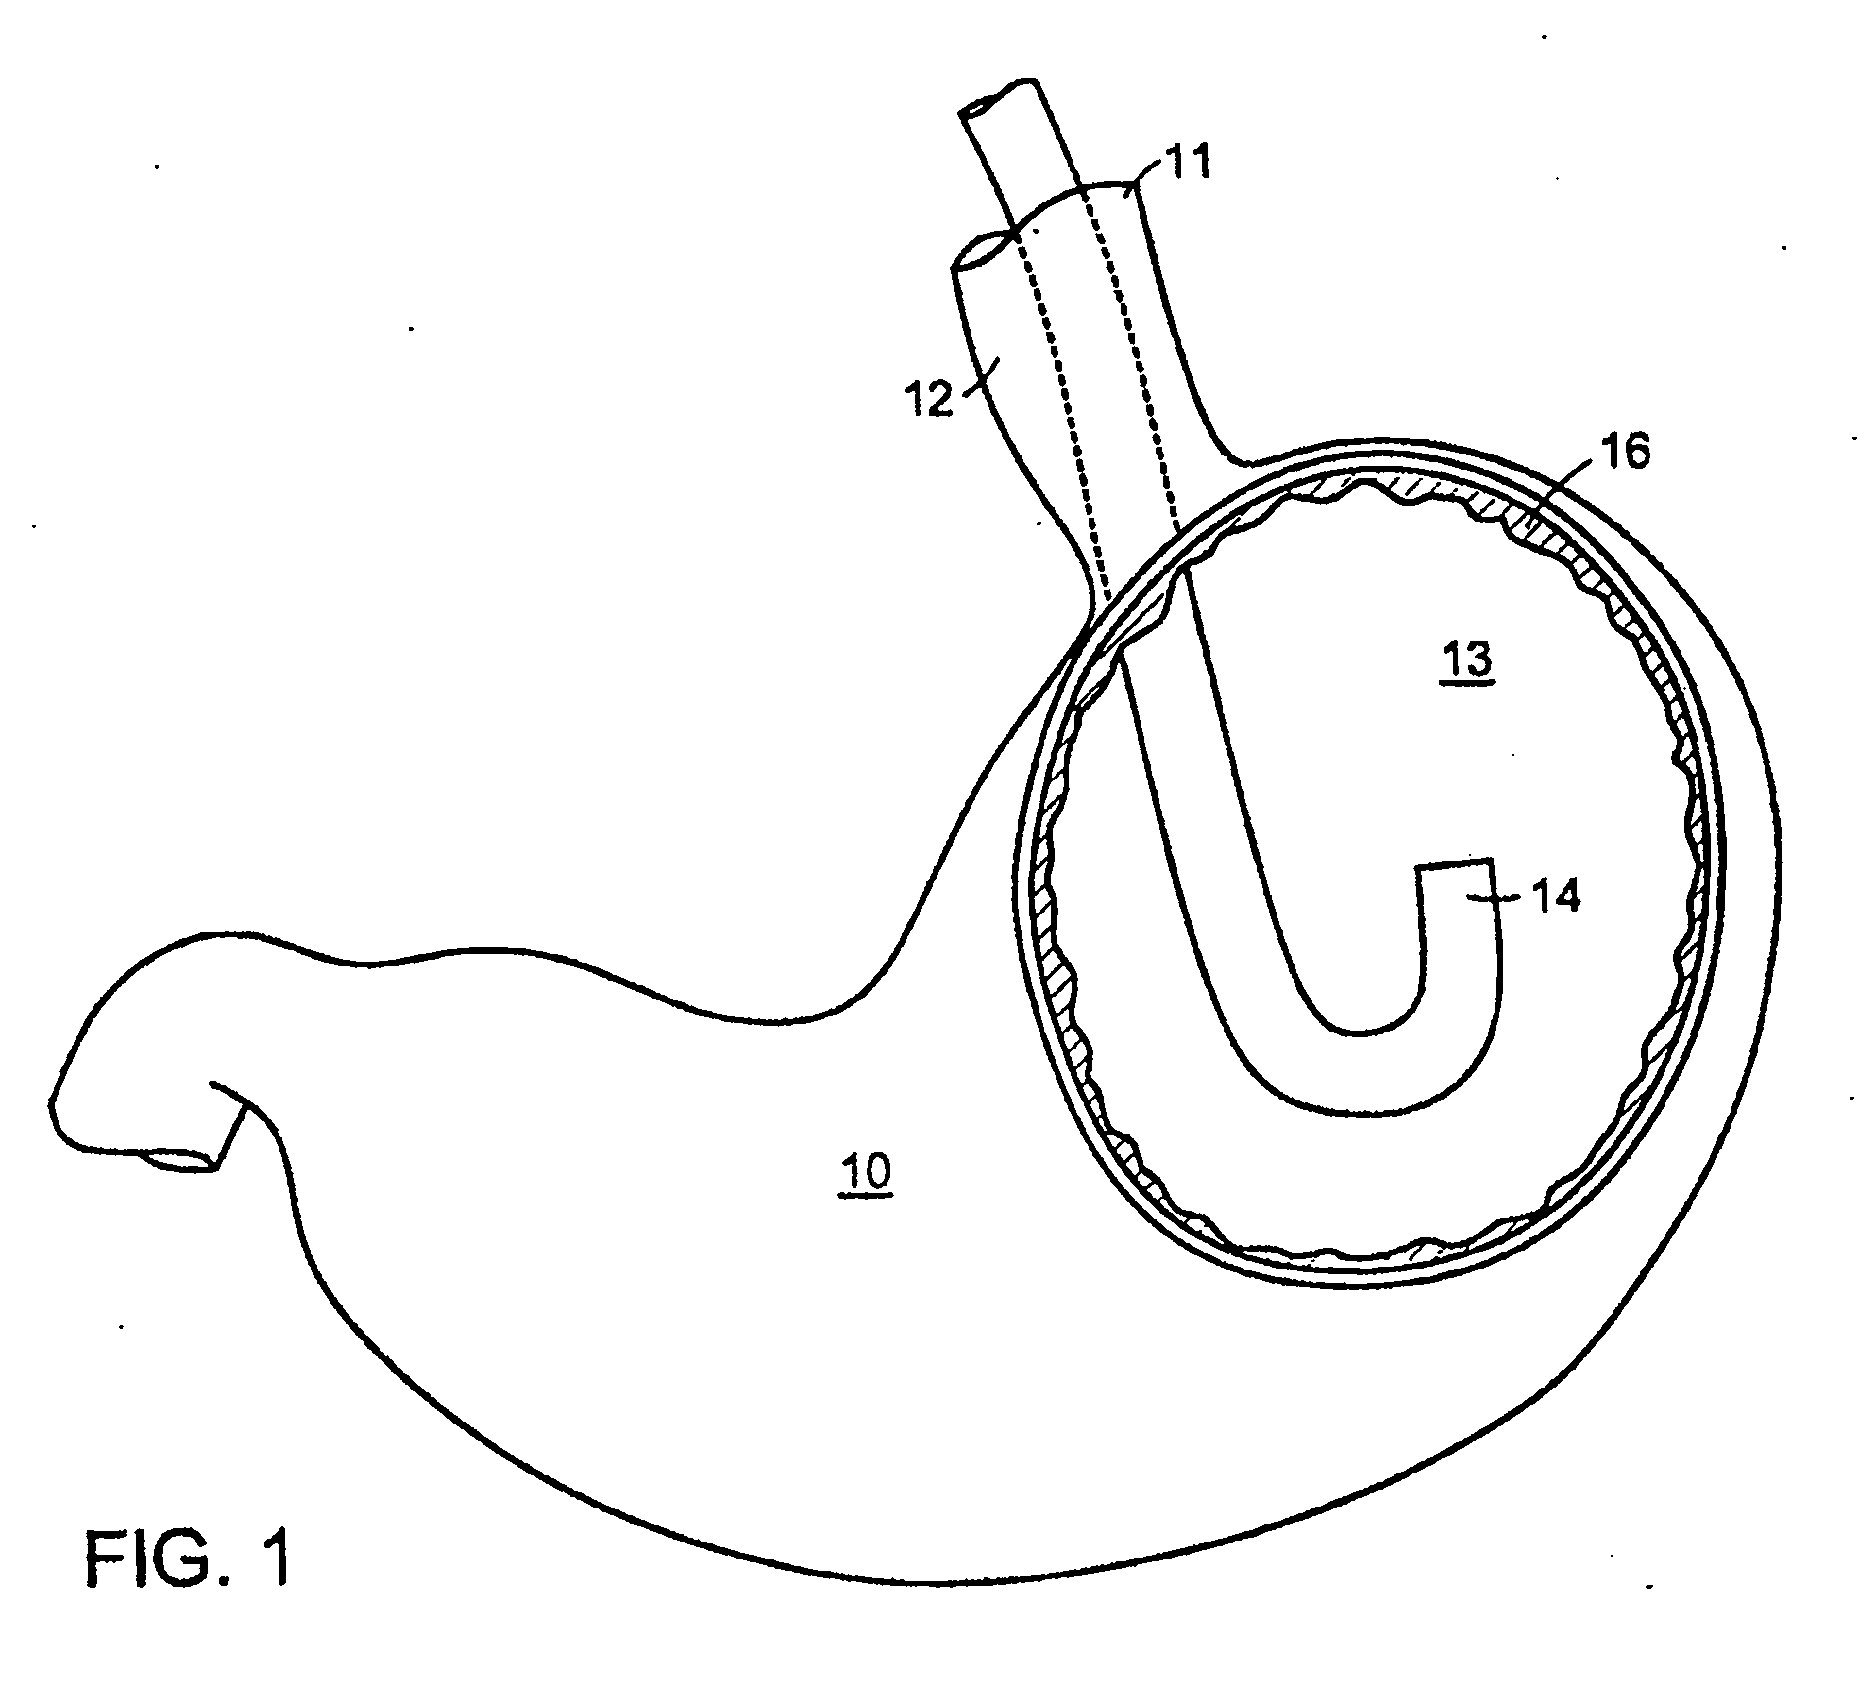 Methods and Devices for Tissue Reconfiguration